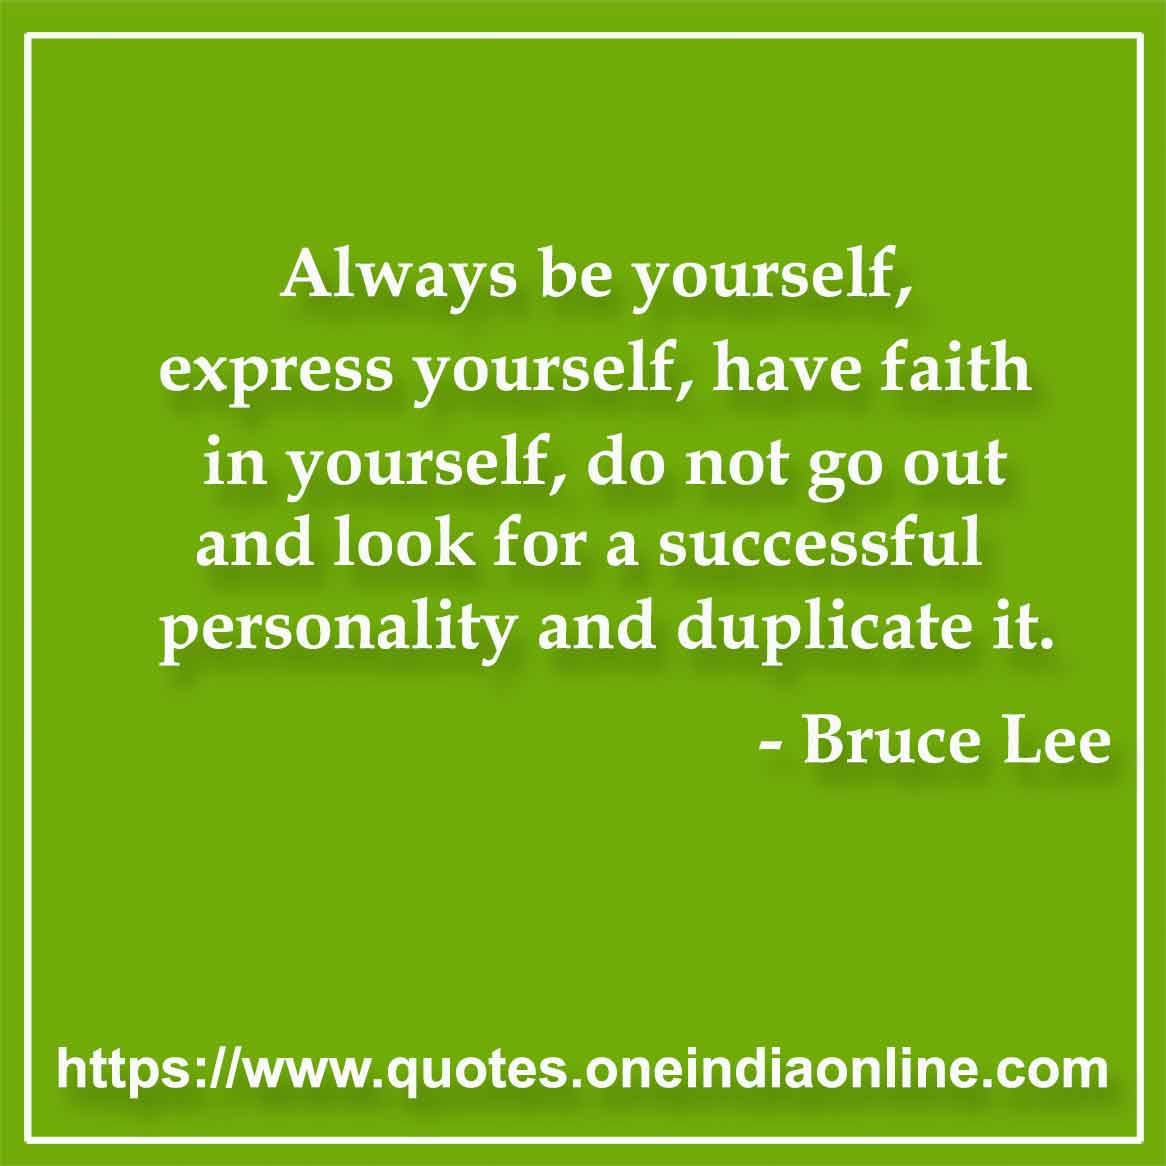 Always be yourself, express yourself, have faith in yourself, do not go out and look for a successful personality and duplicate it.

- Bruce Lee